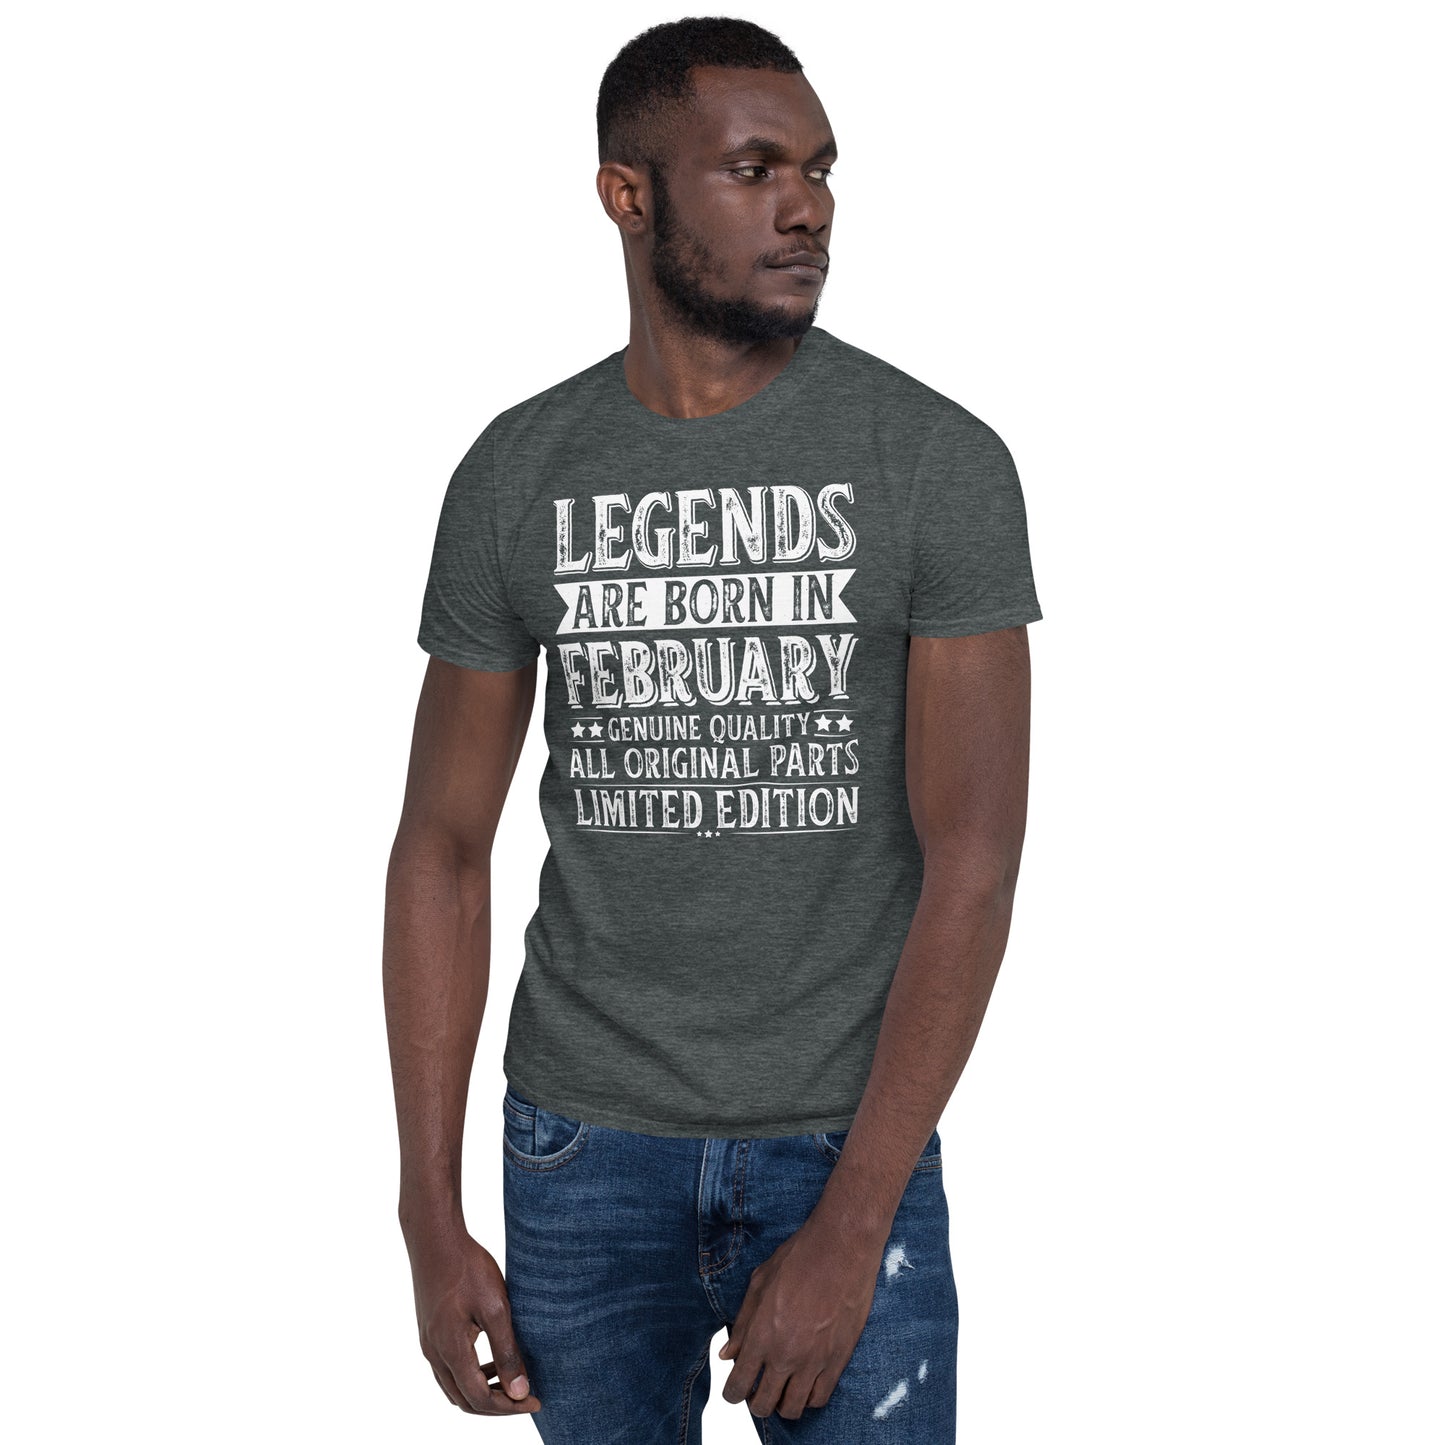 Legends Are Born in February Short-Sleeve Unisex T-Shirt